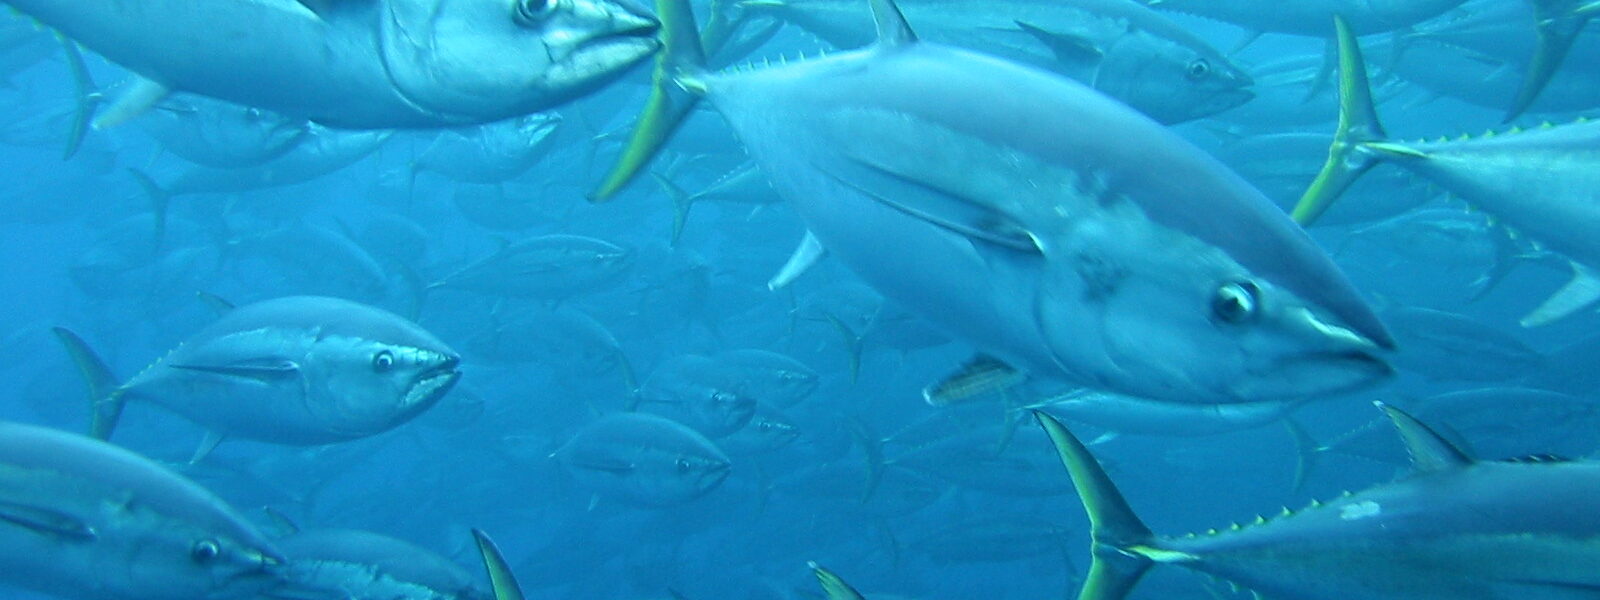 Yellowfin tuna, the species that swims with dolphins. Credit: National Marine Fisheries Service